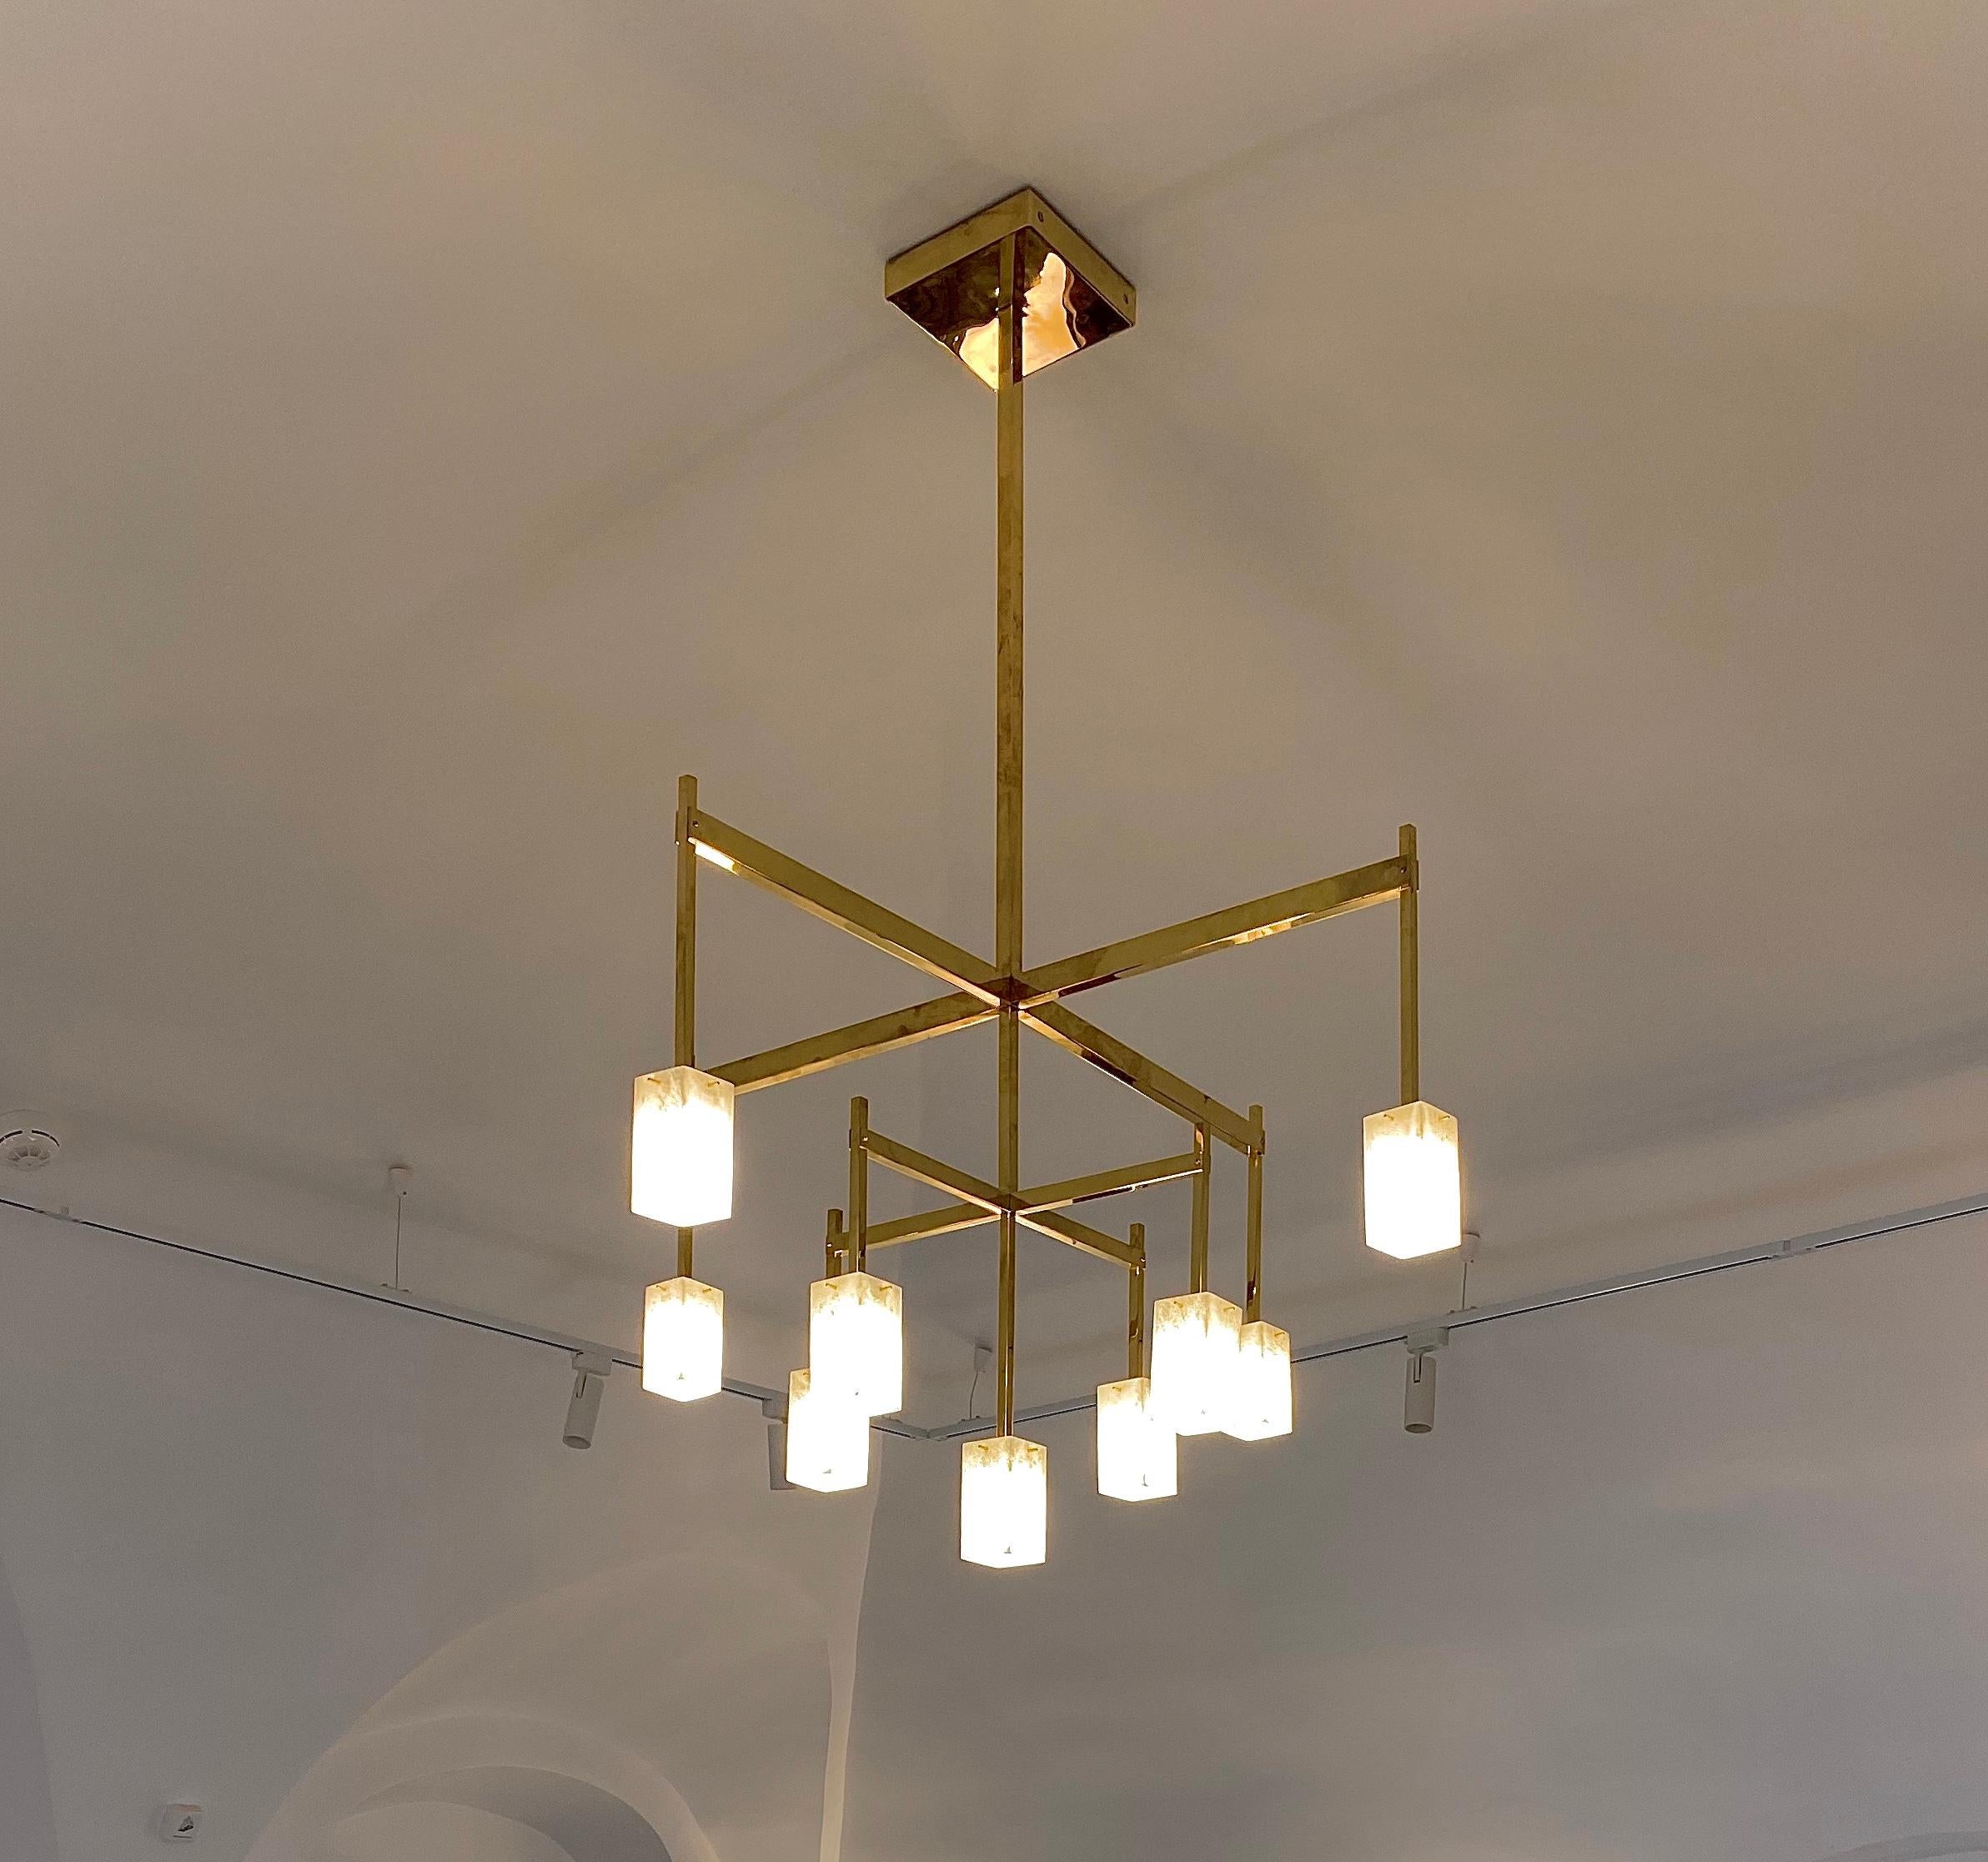 Chandelier Clochette in brass and alabaster designed by Jean-Yves lanvin and realized in the Arriau workshop.

Can be customized in size and number of lightings.